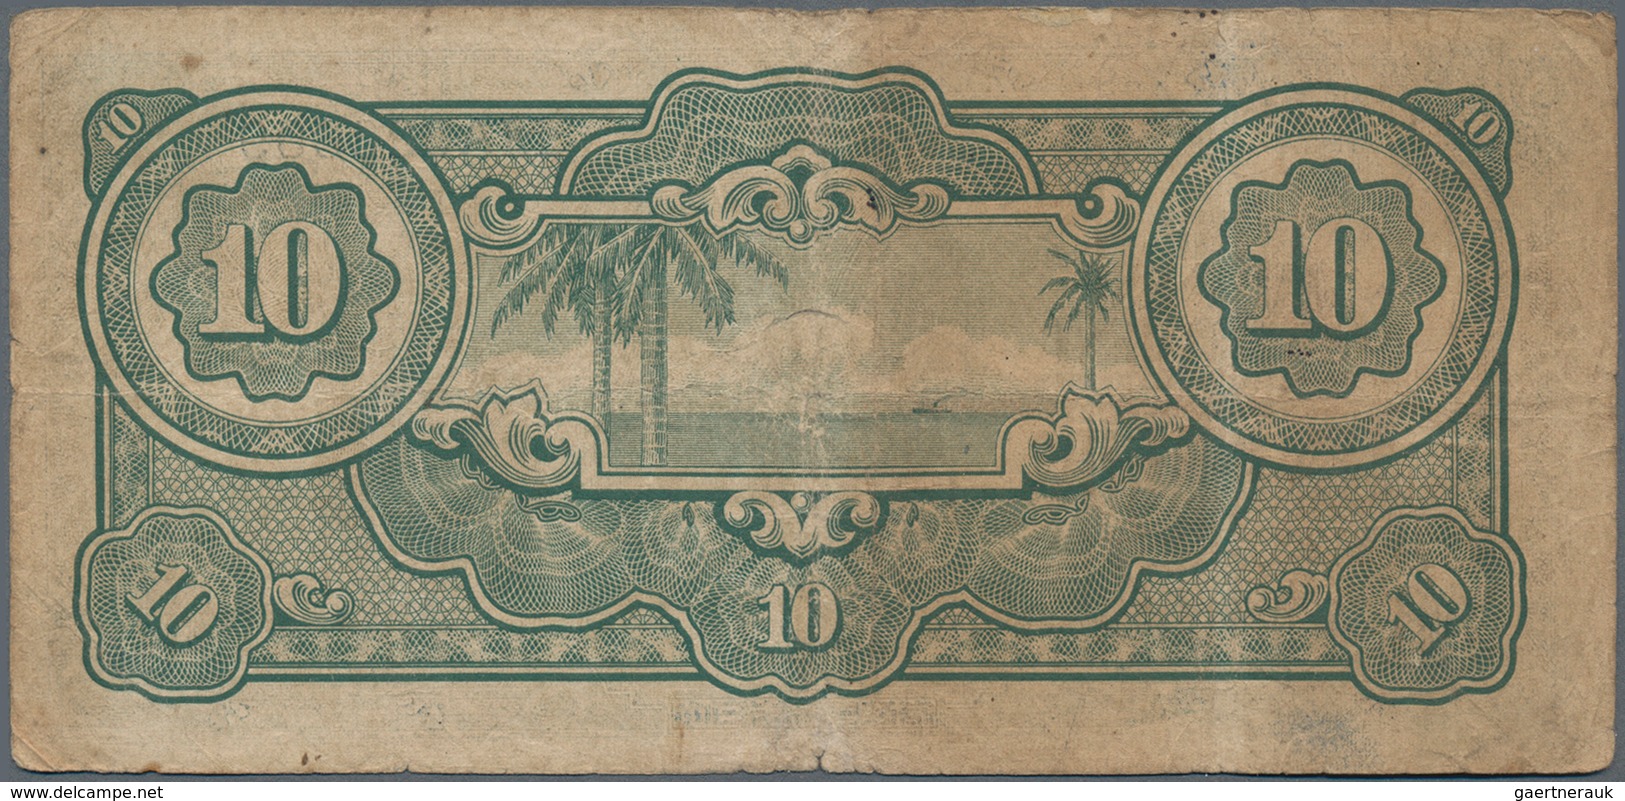 Malaya: The Japanese Government Set With 4 Banknotes 10 Dollars ND(1942-44), P.M7a In F-/F Condition - Maleisië